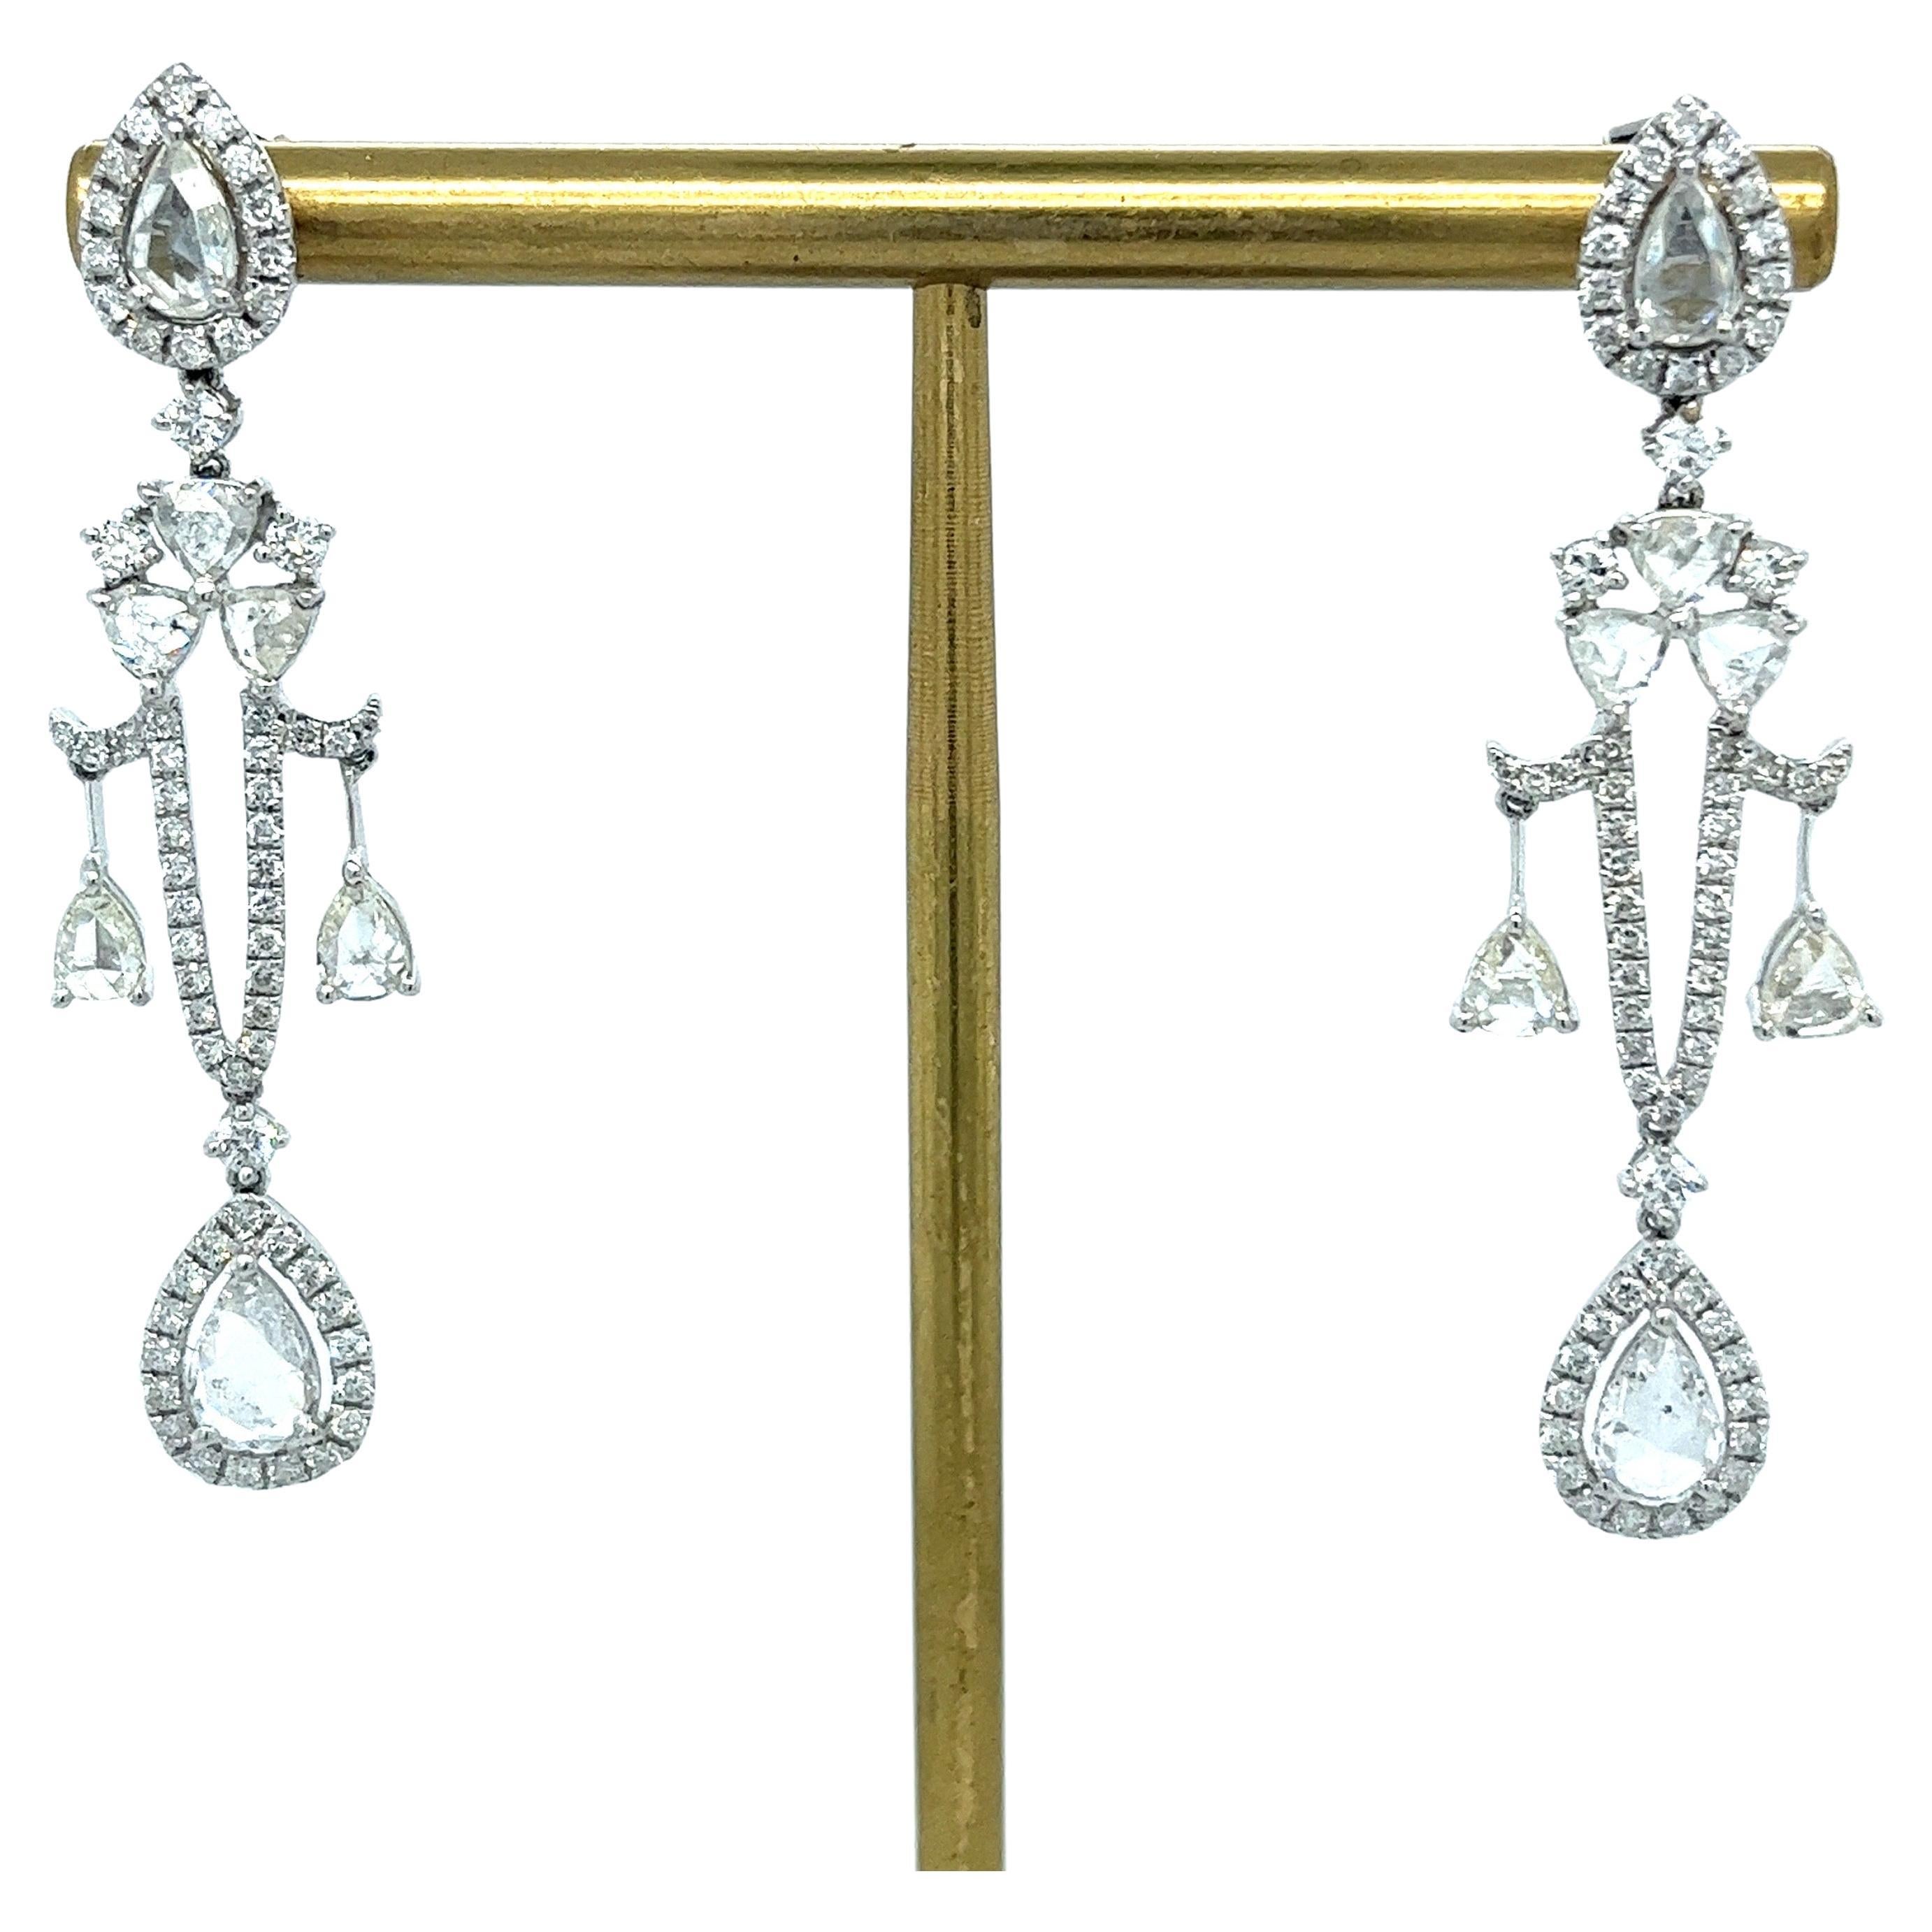 18K White Gold Diamond Droop Earrings

138 Diamonds - 3.82 CT
18K White Gold - 7.76 GM

Adorn yourself with the exquisite elegance of these 18K White Gold Diamond Droop Earrings. Featuring a mesmerizing cascade of 138 diamonds totaling 3.82 CT,